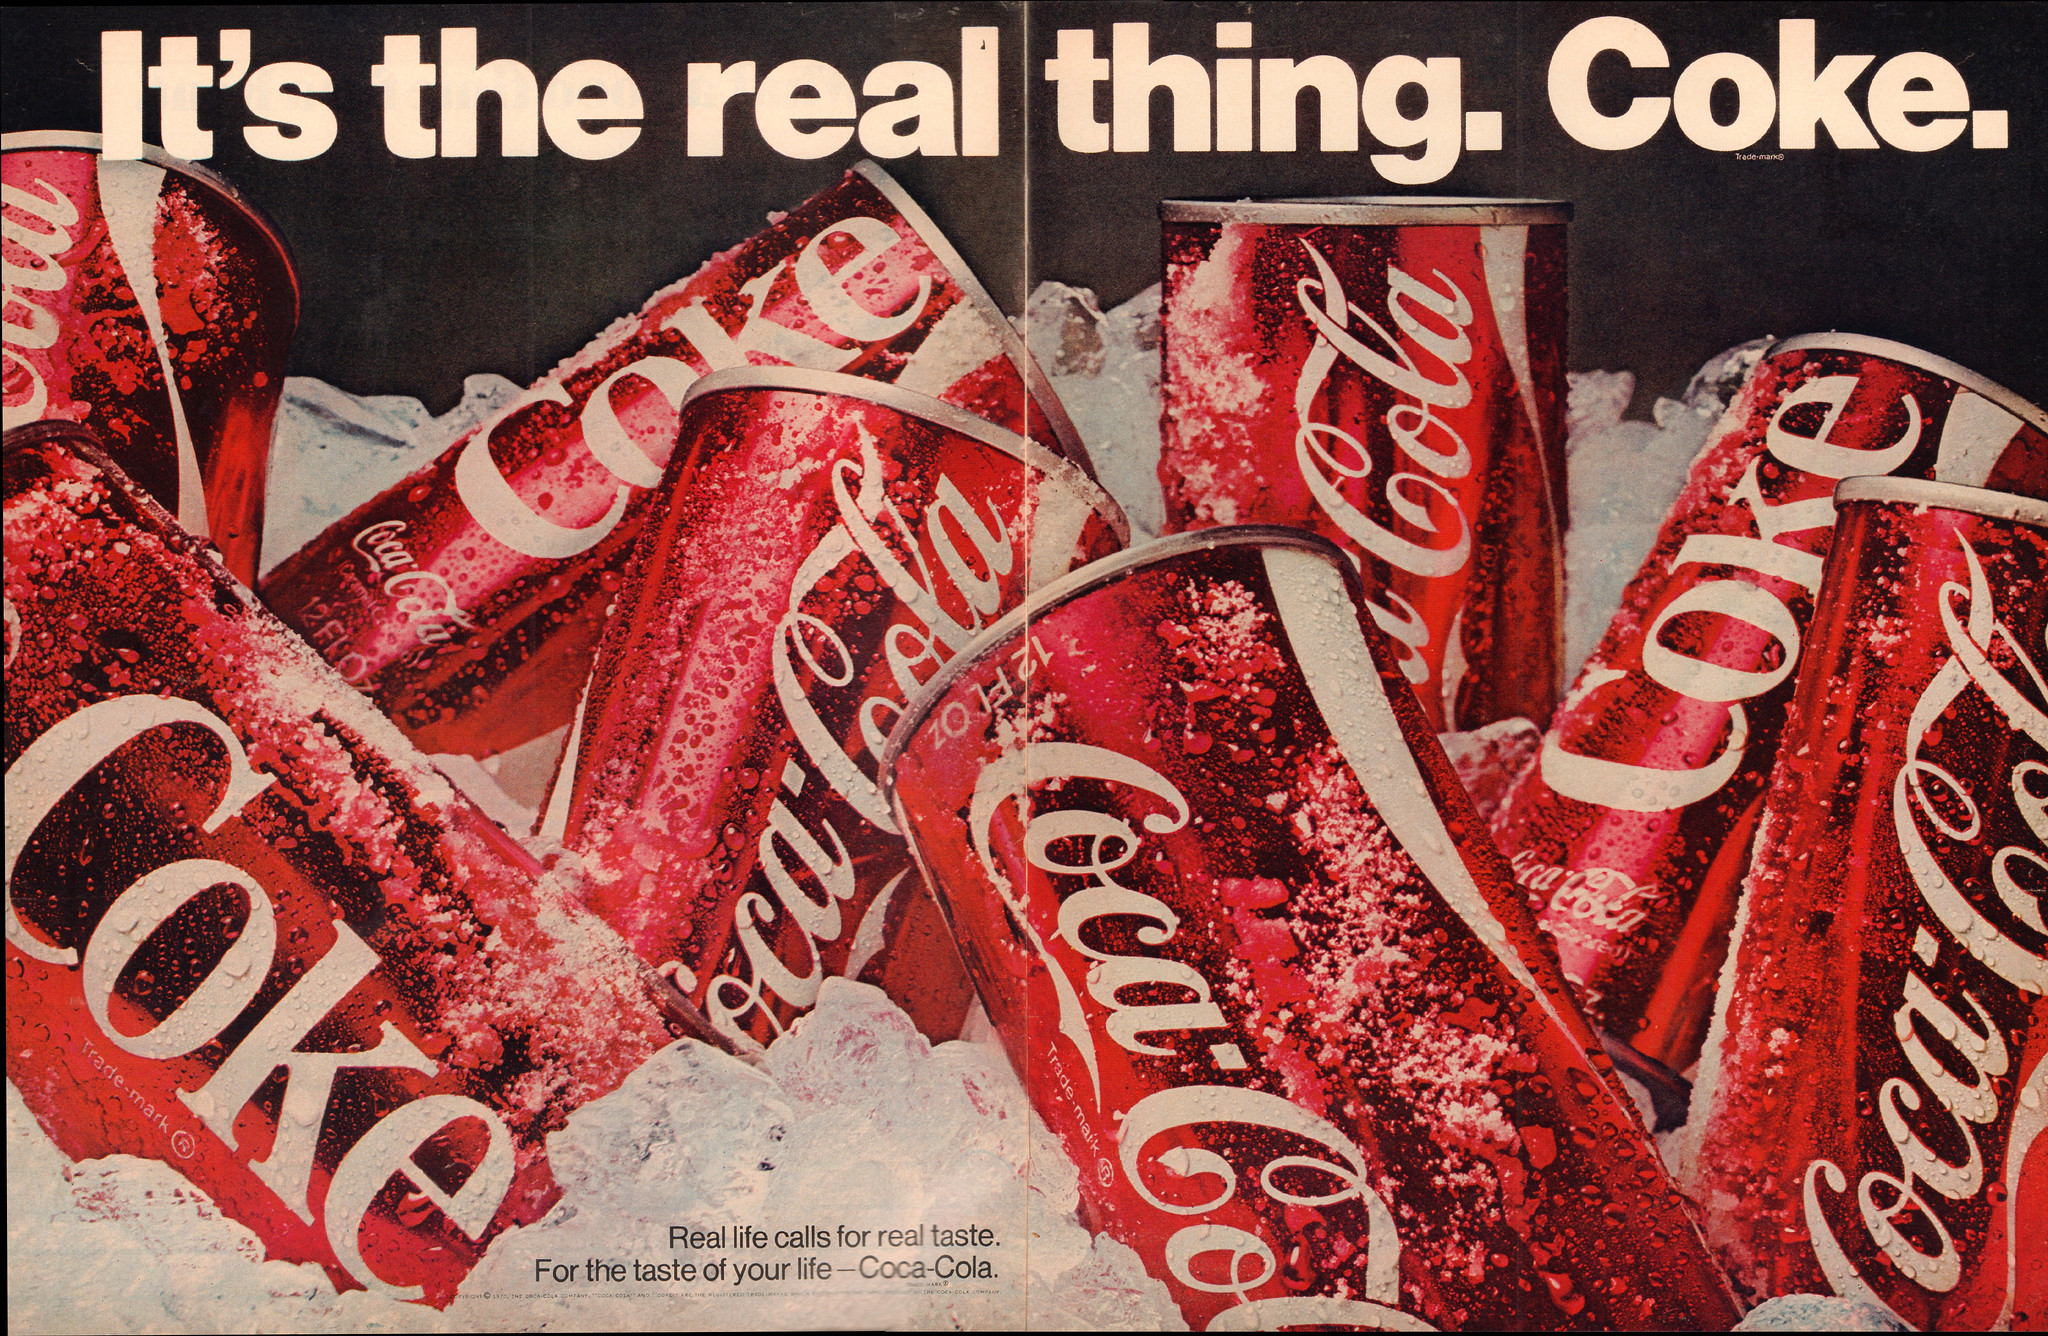 A 1970 Coca-Cola Coke advertisement in Life Magazine. Marketing agencies relied on consumer data to target advertisements. 